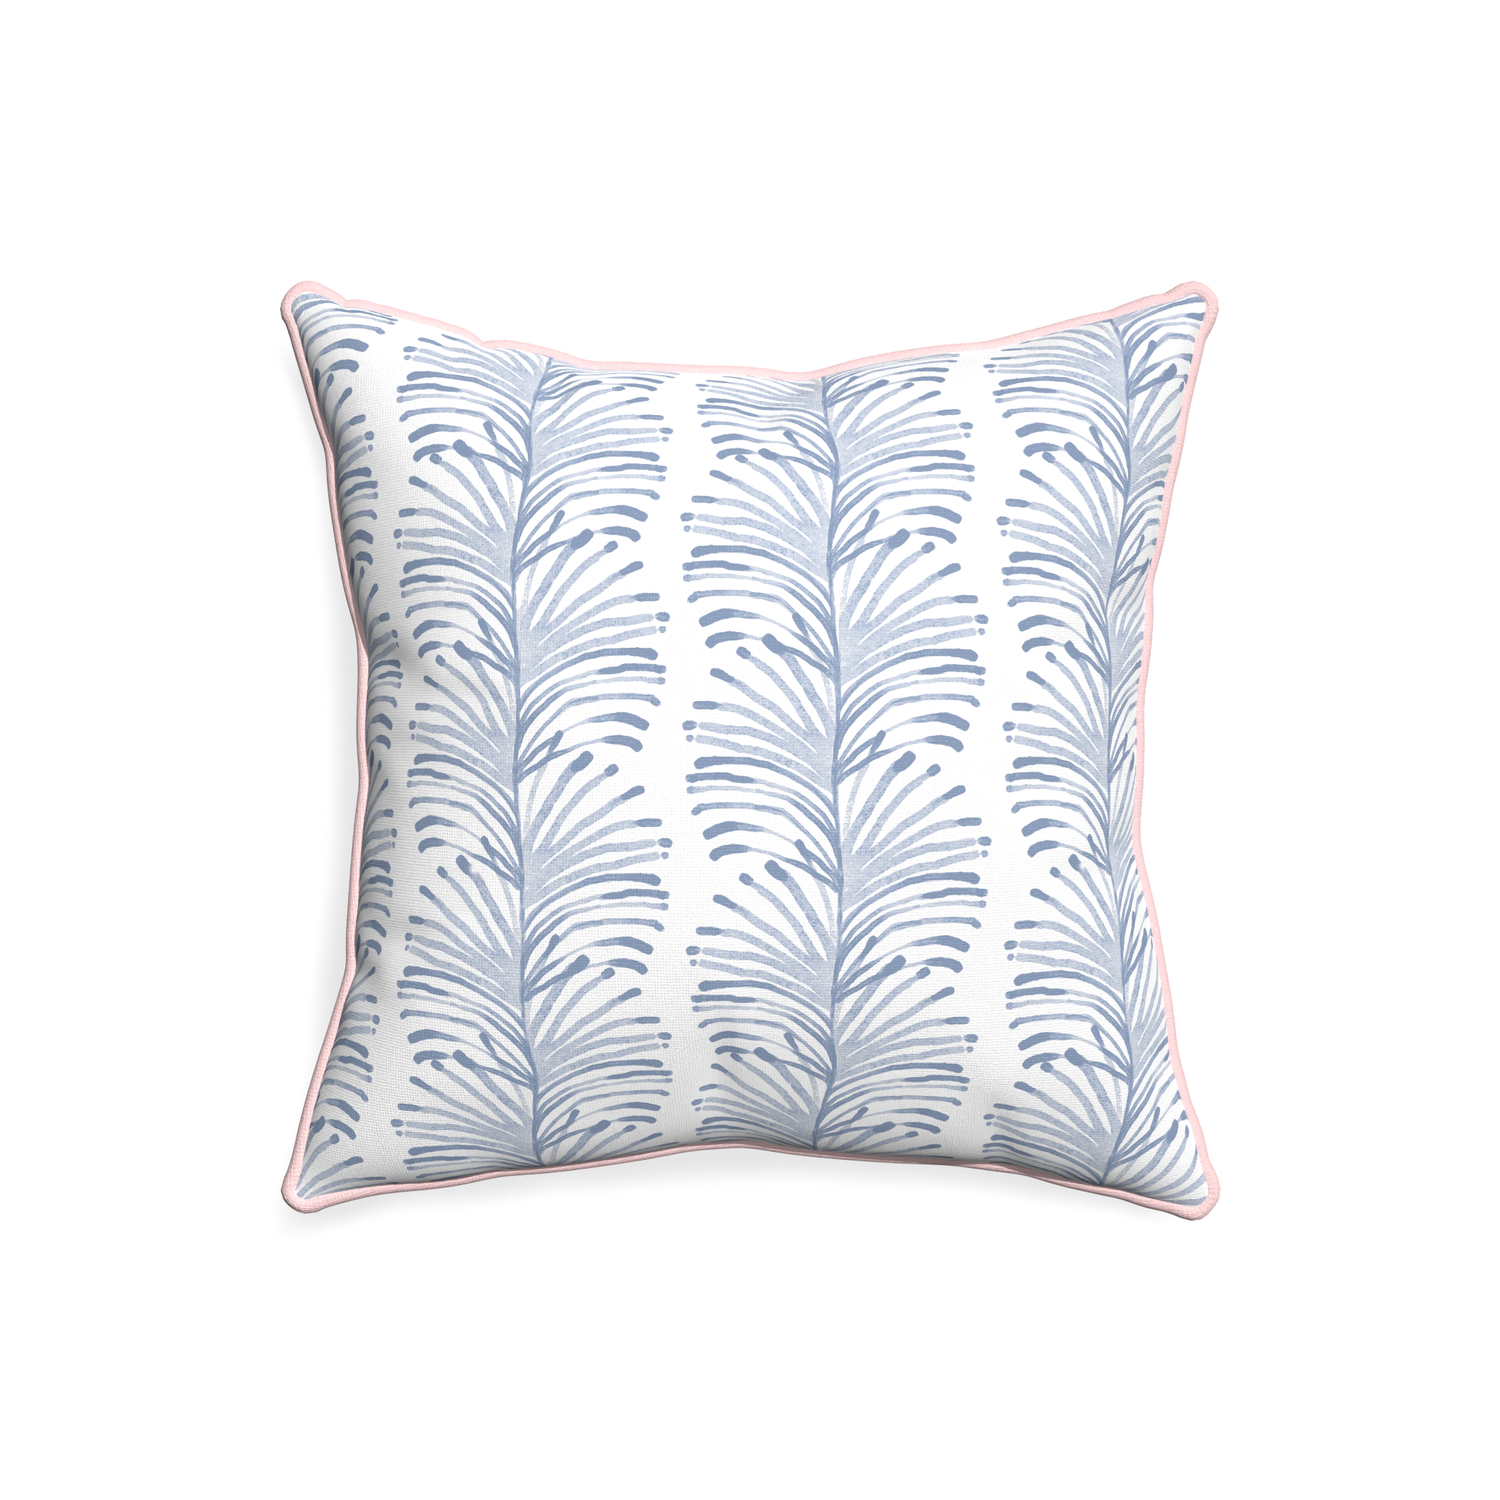 20-square emma sky custom sky blue botanical stripepillow with petal piping on white background